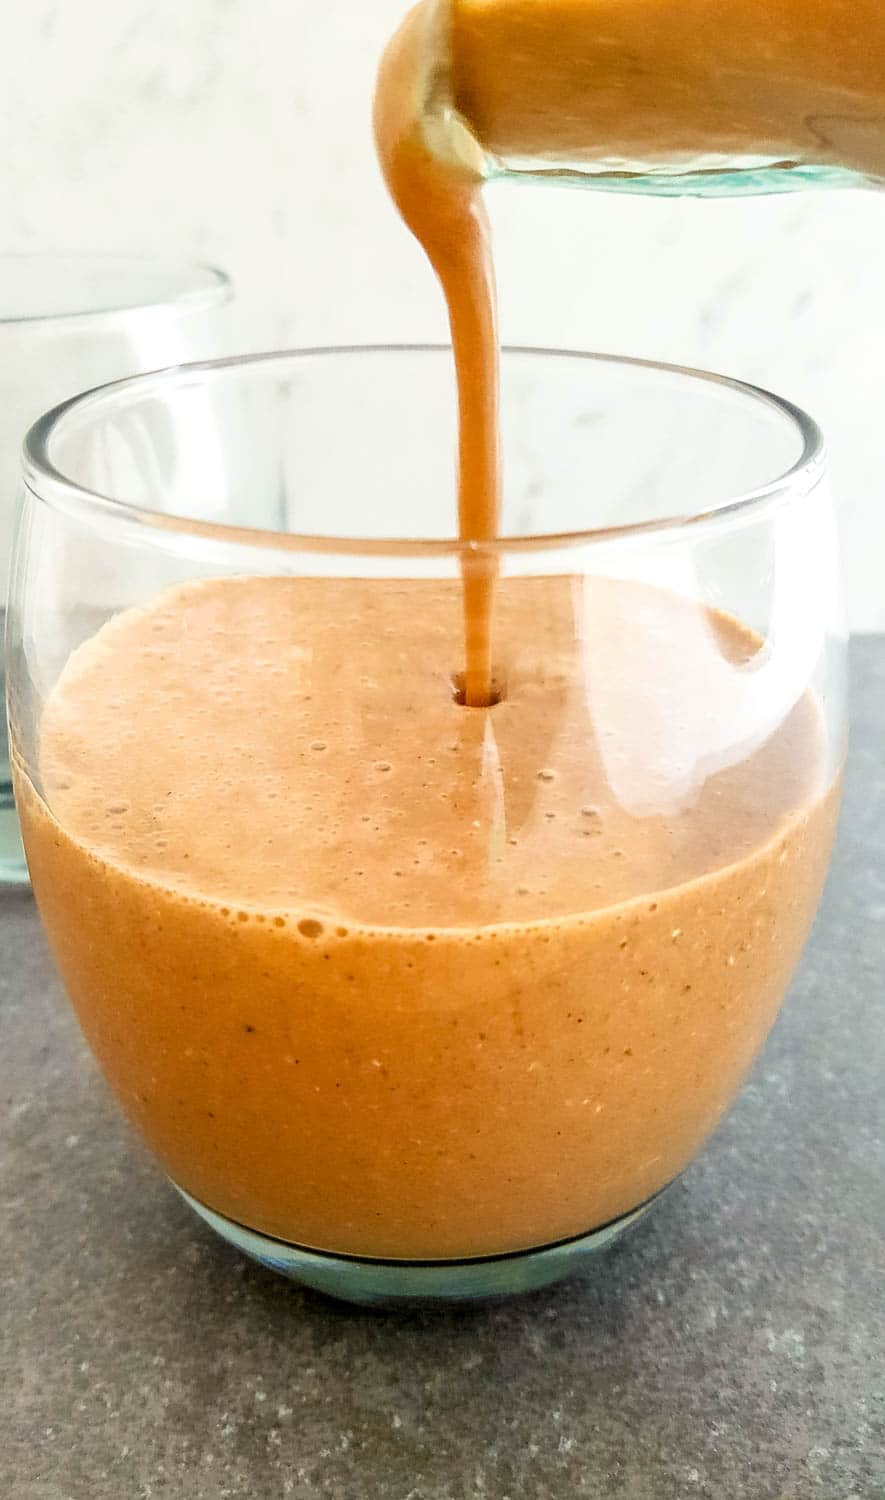 healthy coffee smoothie